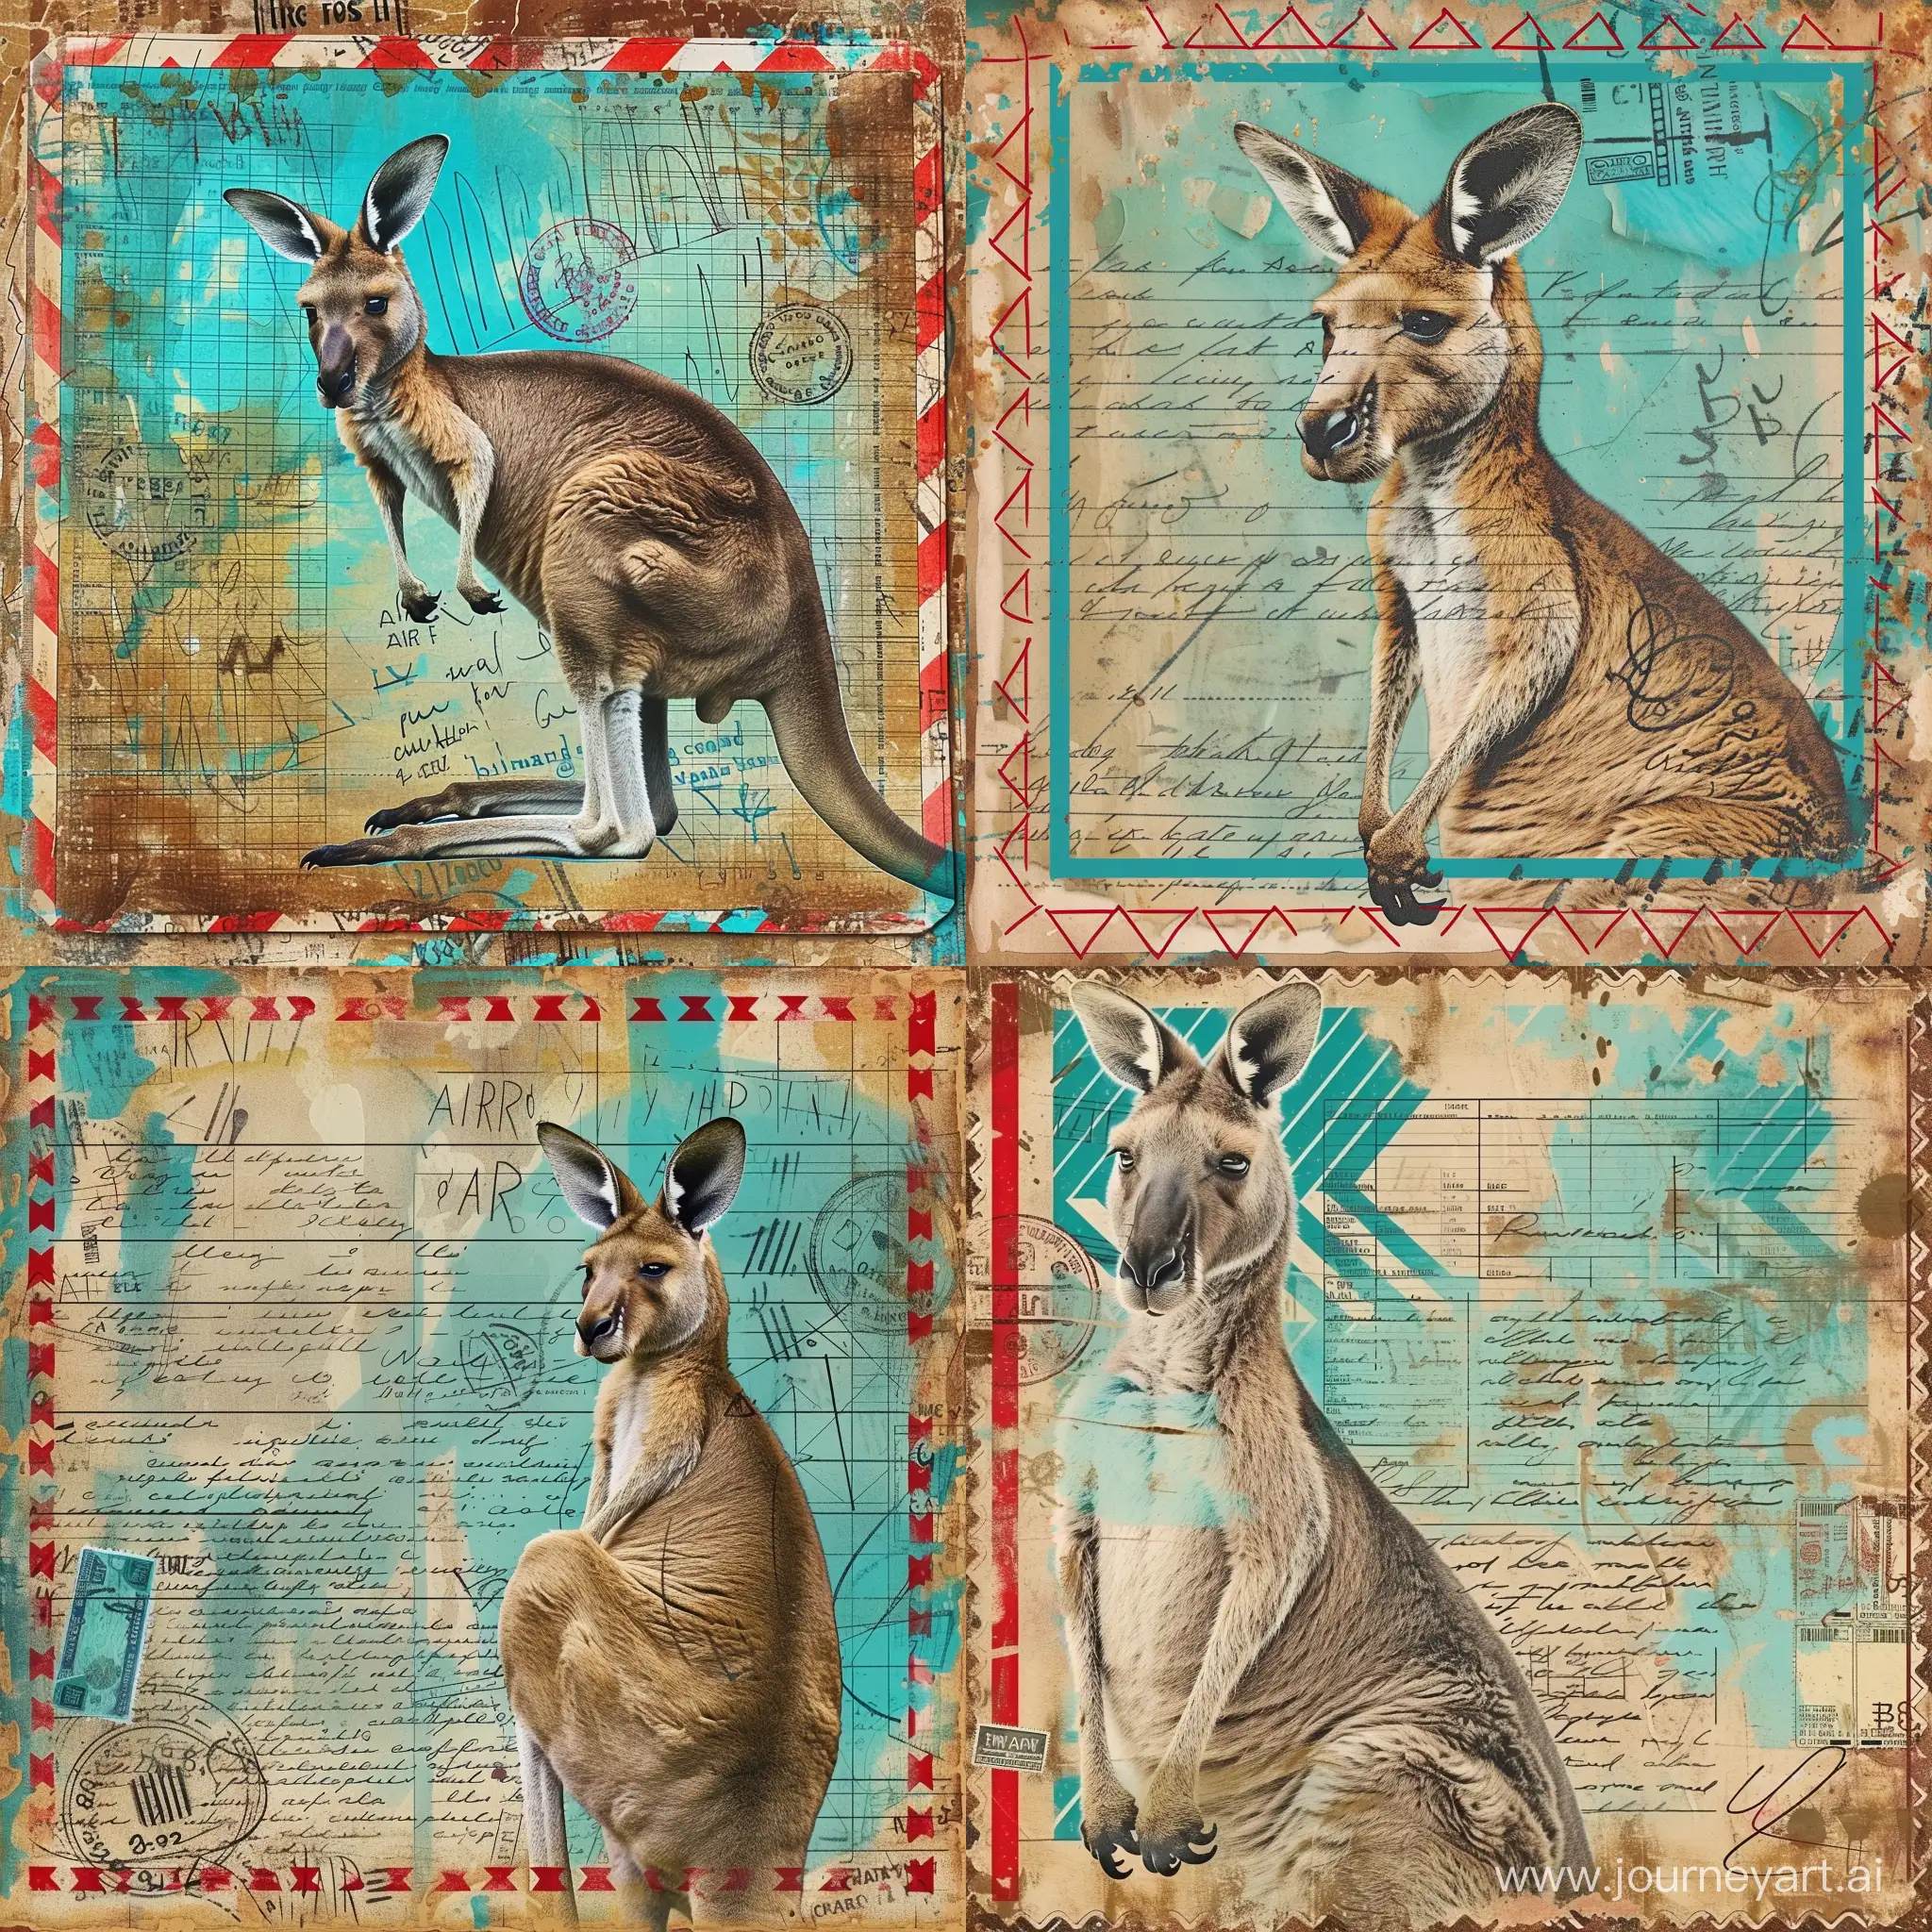 Create mail art, a postcard with a blue and red airmail border, the whole image resembles a mixed media collage with an overall distressed and vintage aesthetic and on the postcard is a kangaroo. The background combines teal, brown, and beige tones with areas of texture mimicking rust and patina. Overlaid texts in various fonts and scripts suggest old handwritten letters or documents. Incorporate abstract shapes with geometric lines and circles. Embellish with postage stamps, scribbles to add an element of spontaneity.